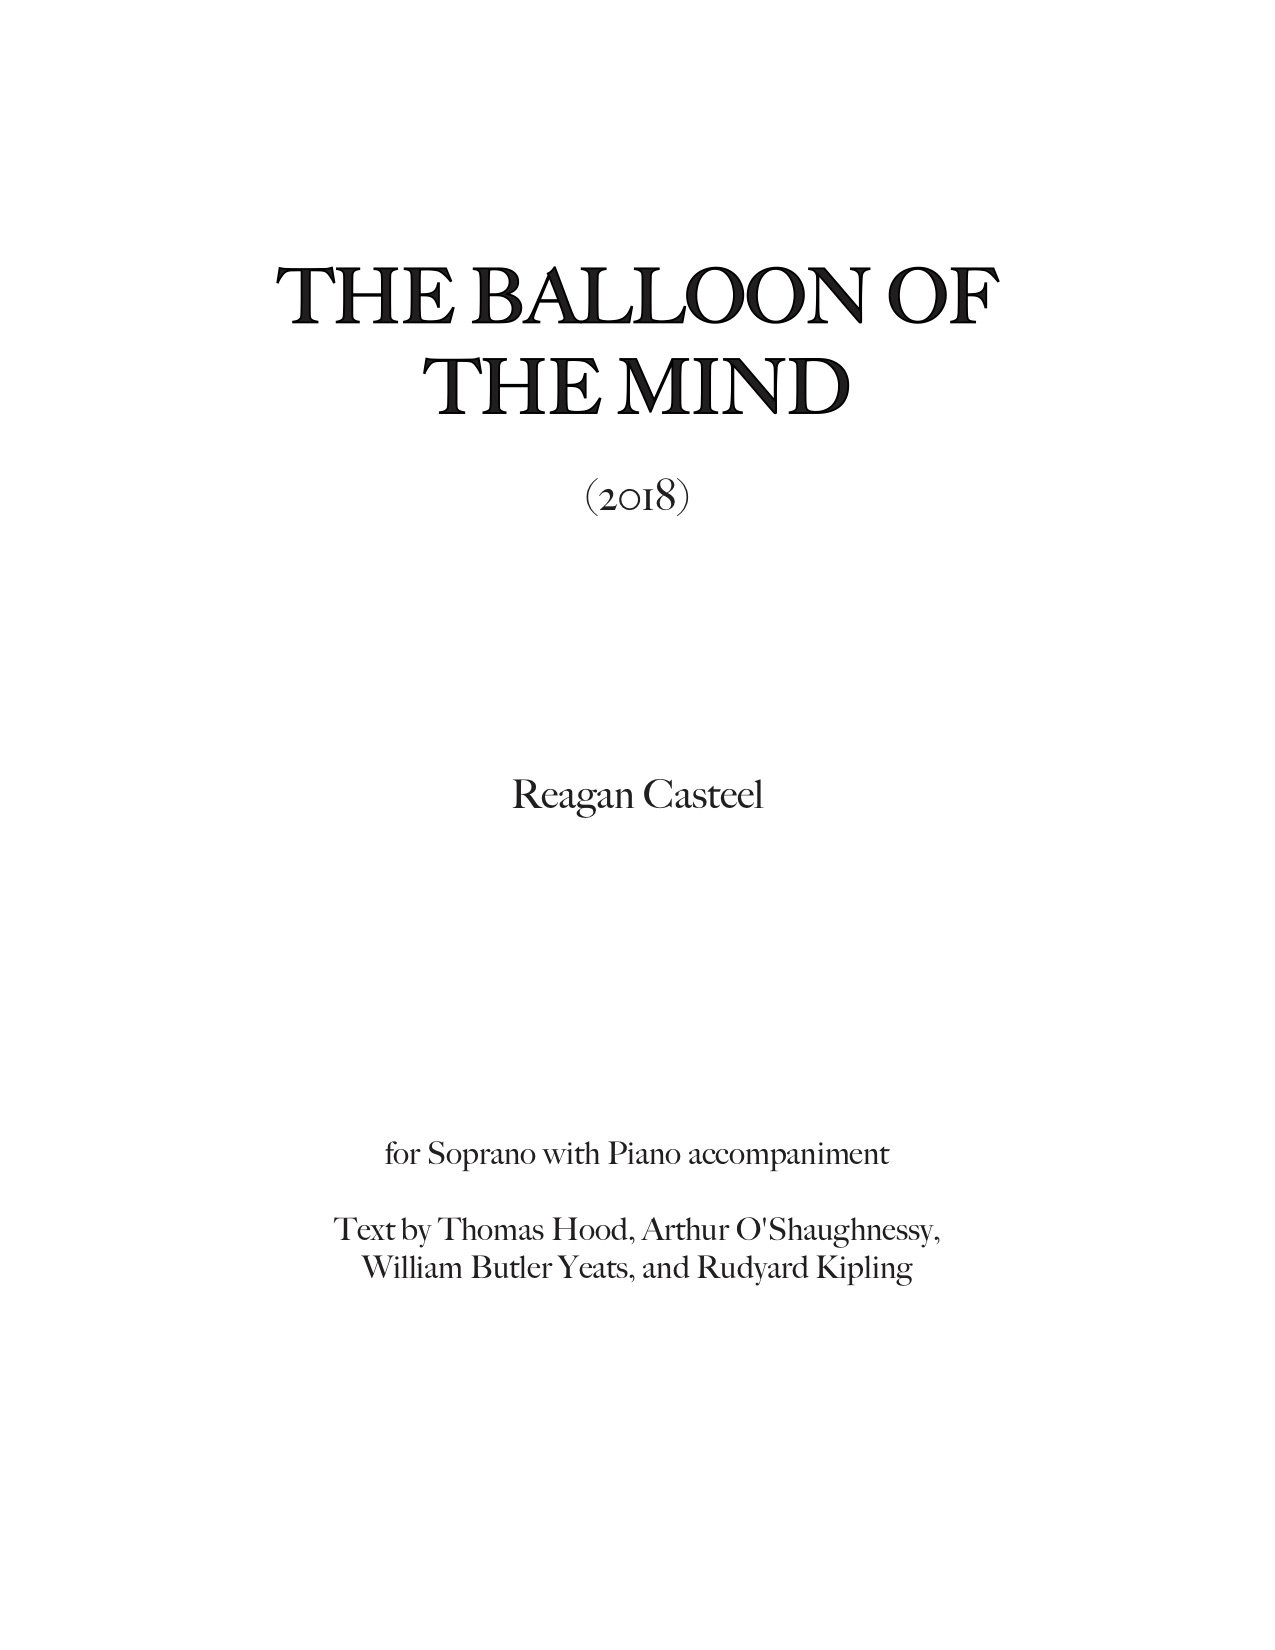 The Balloon of the Mind Full Scores copy (dragged).jpg